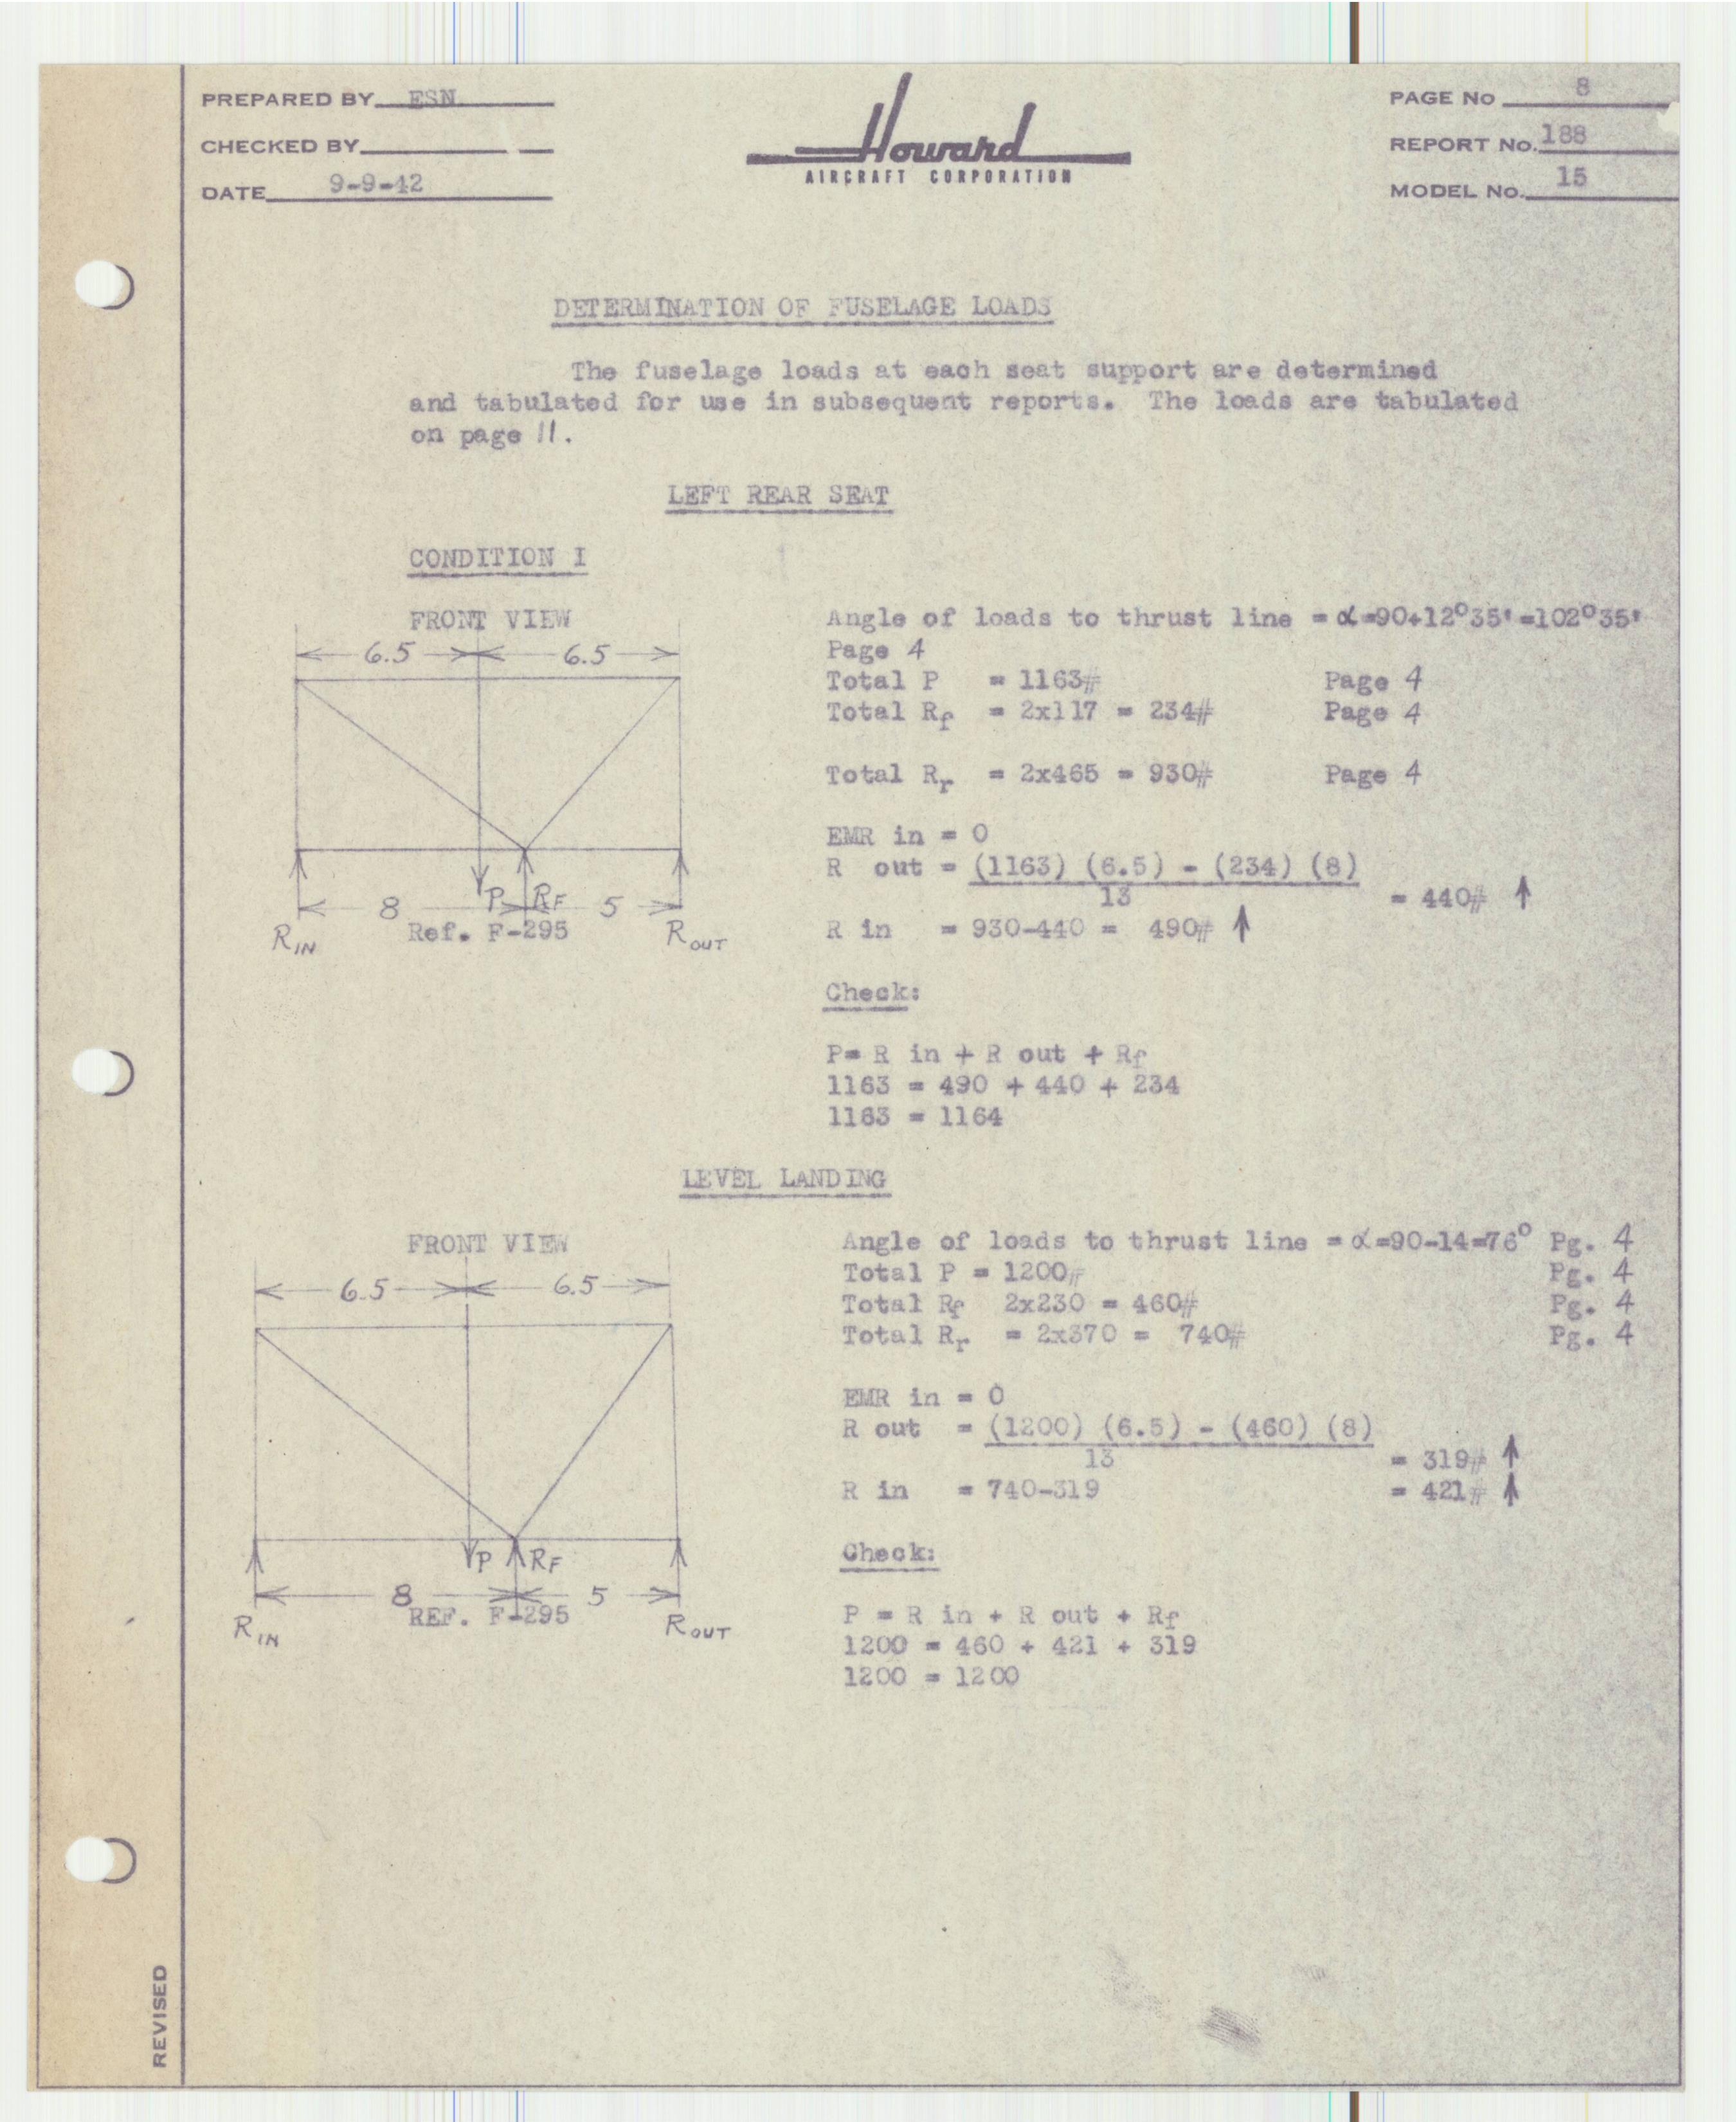 Sample page 9 from AirCorps Library document: Report 188, Analysis of Individual Rear Seats, DGA-15